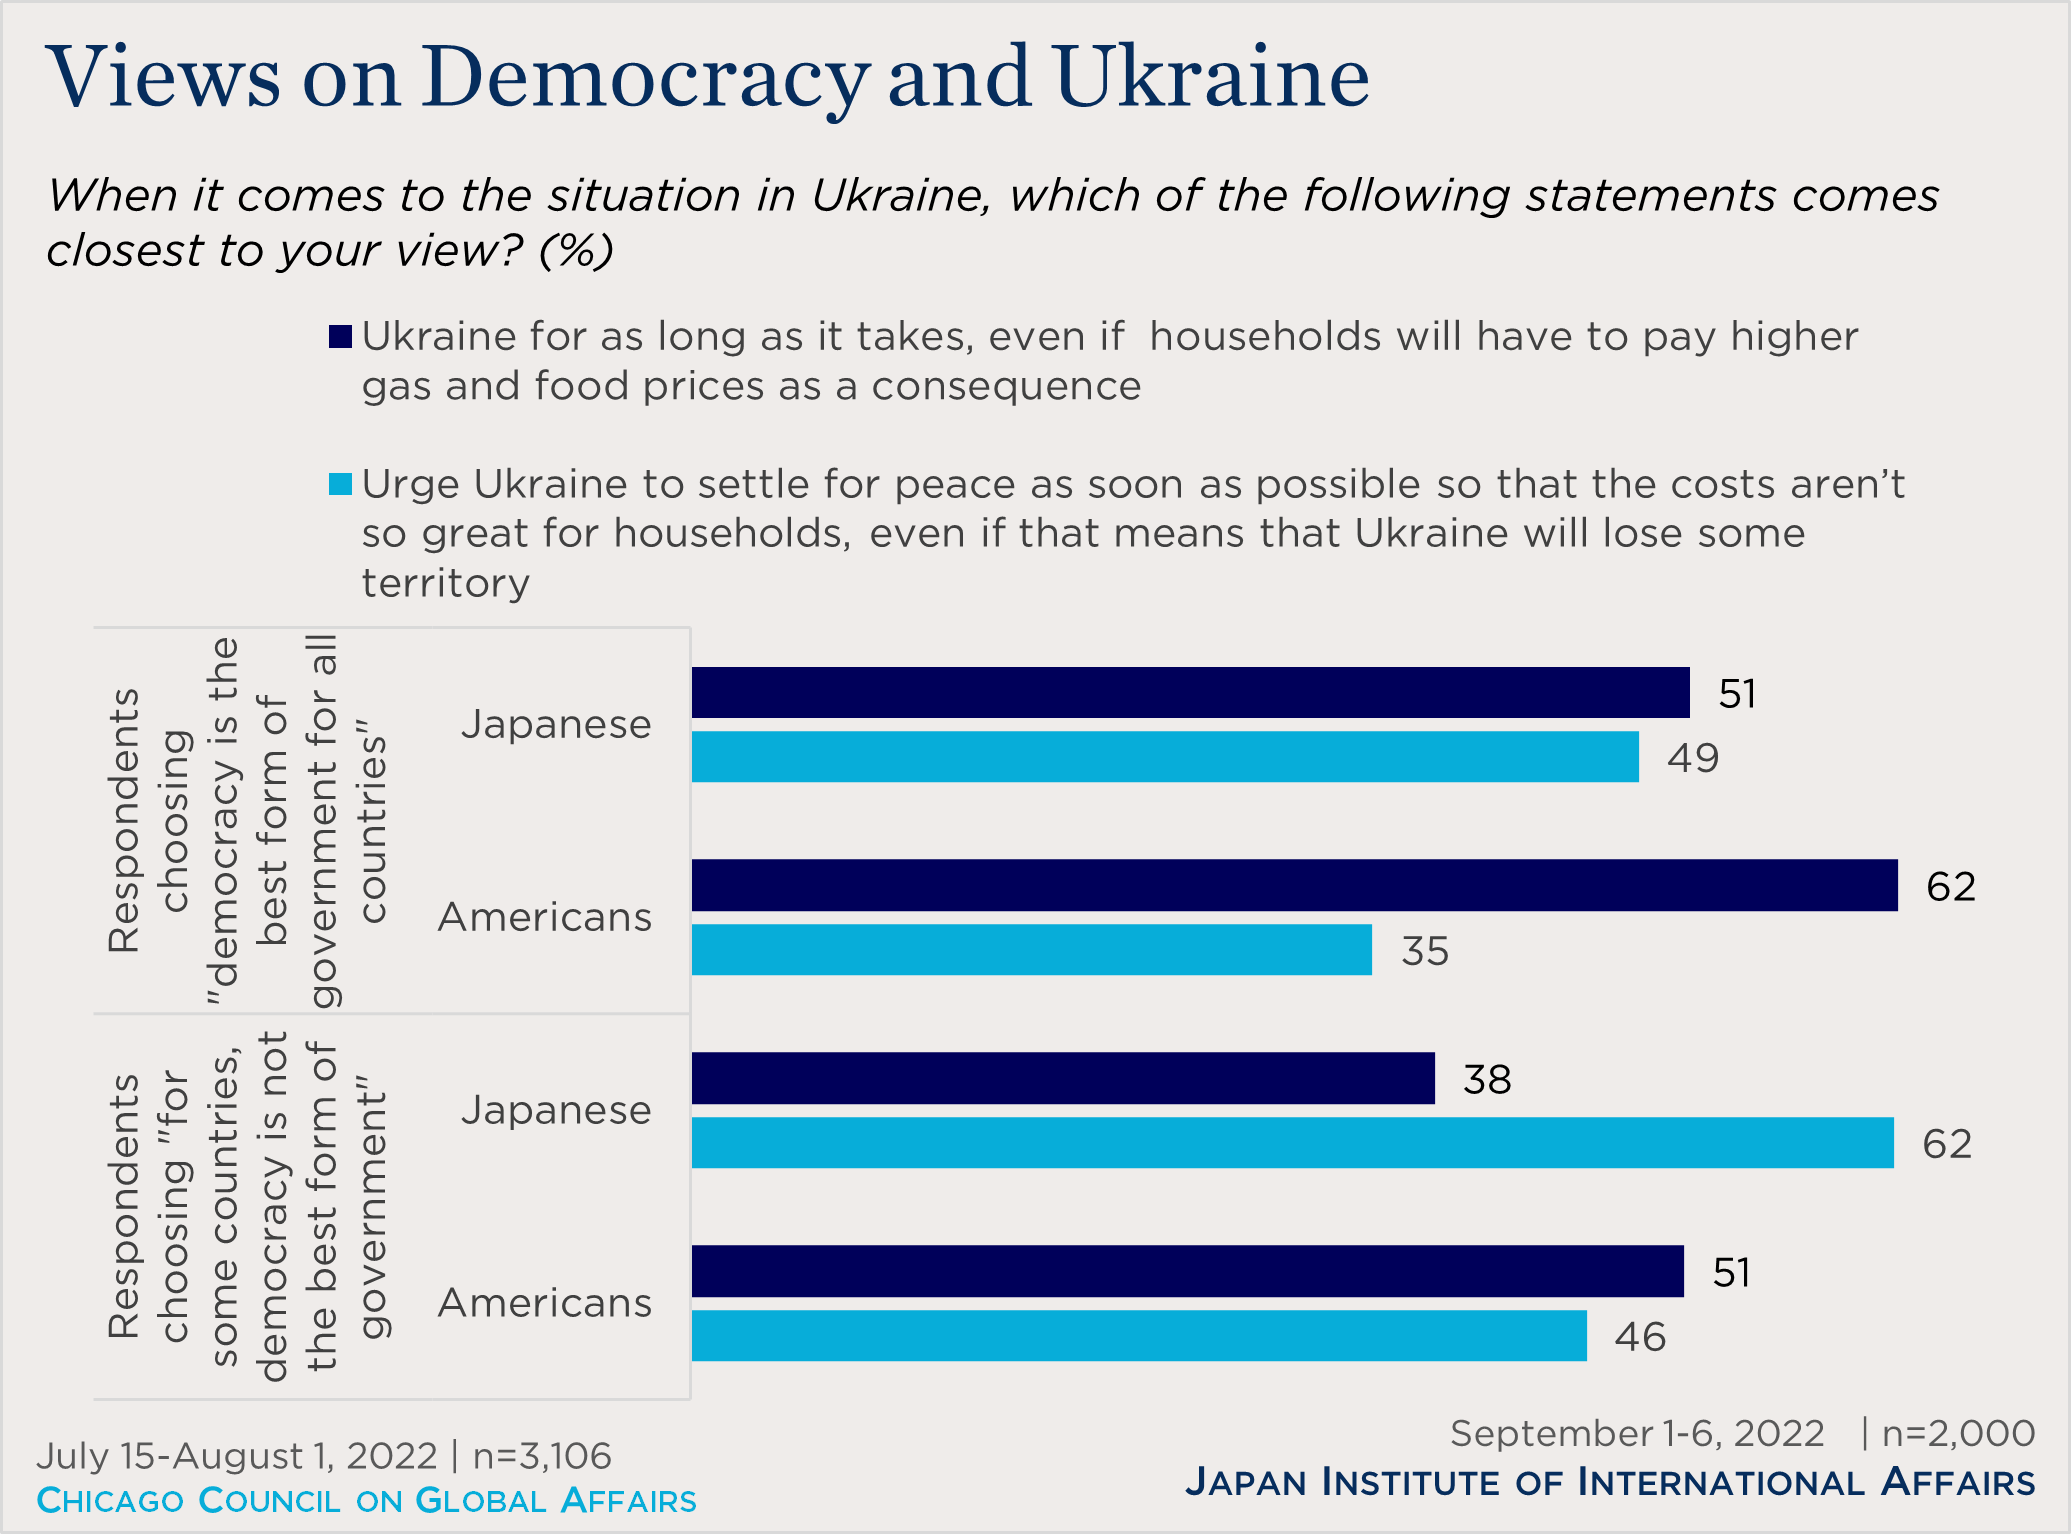 "bar chart showing views on democracy and Ukraine"